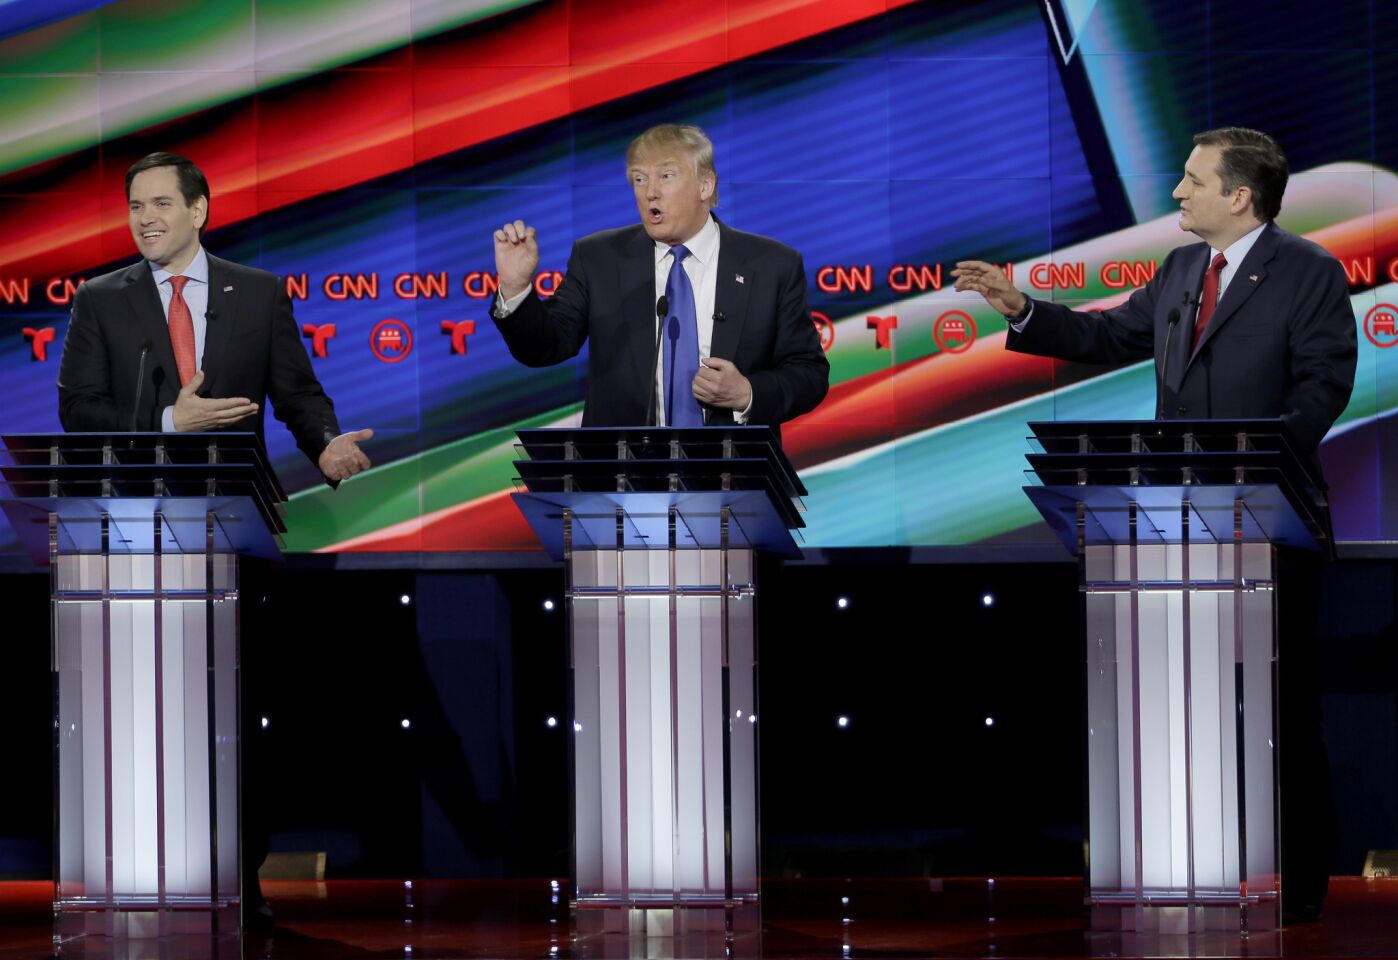 Republican presidential candidates, from left, Marco Rubio, Donald Trump and Ted Cruz in Thursday's debate in Houston.